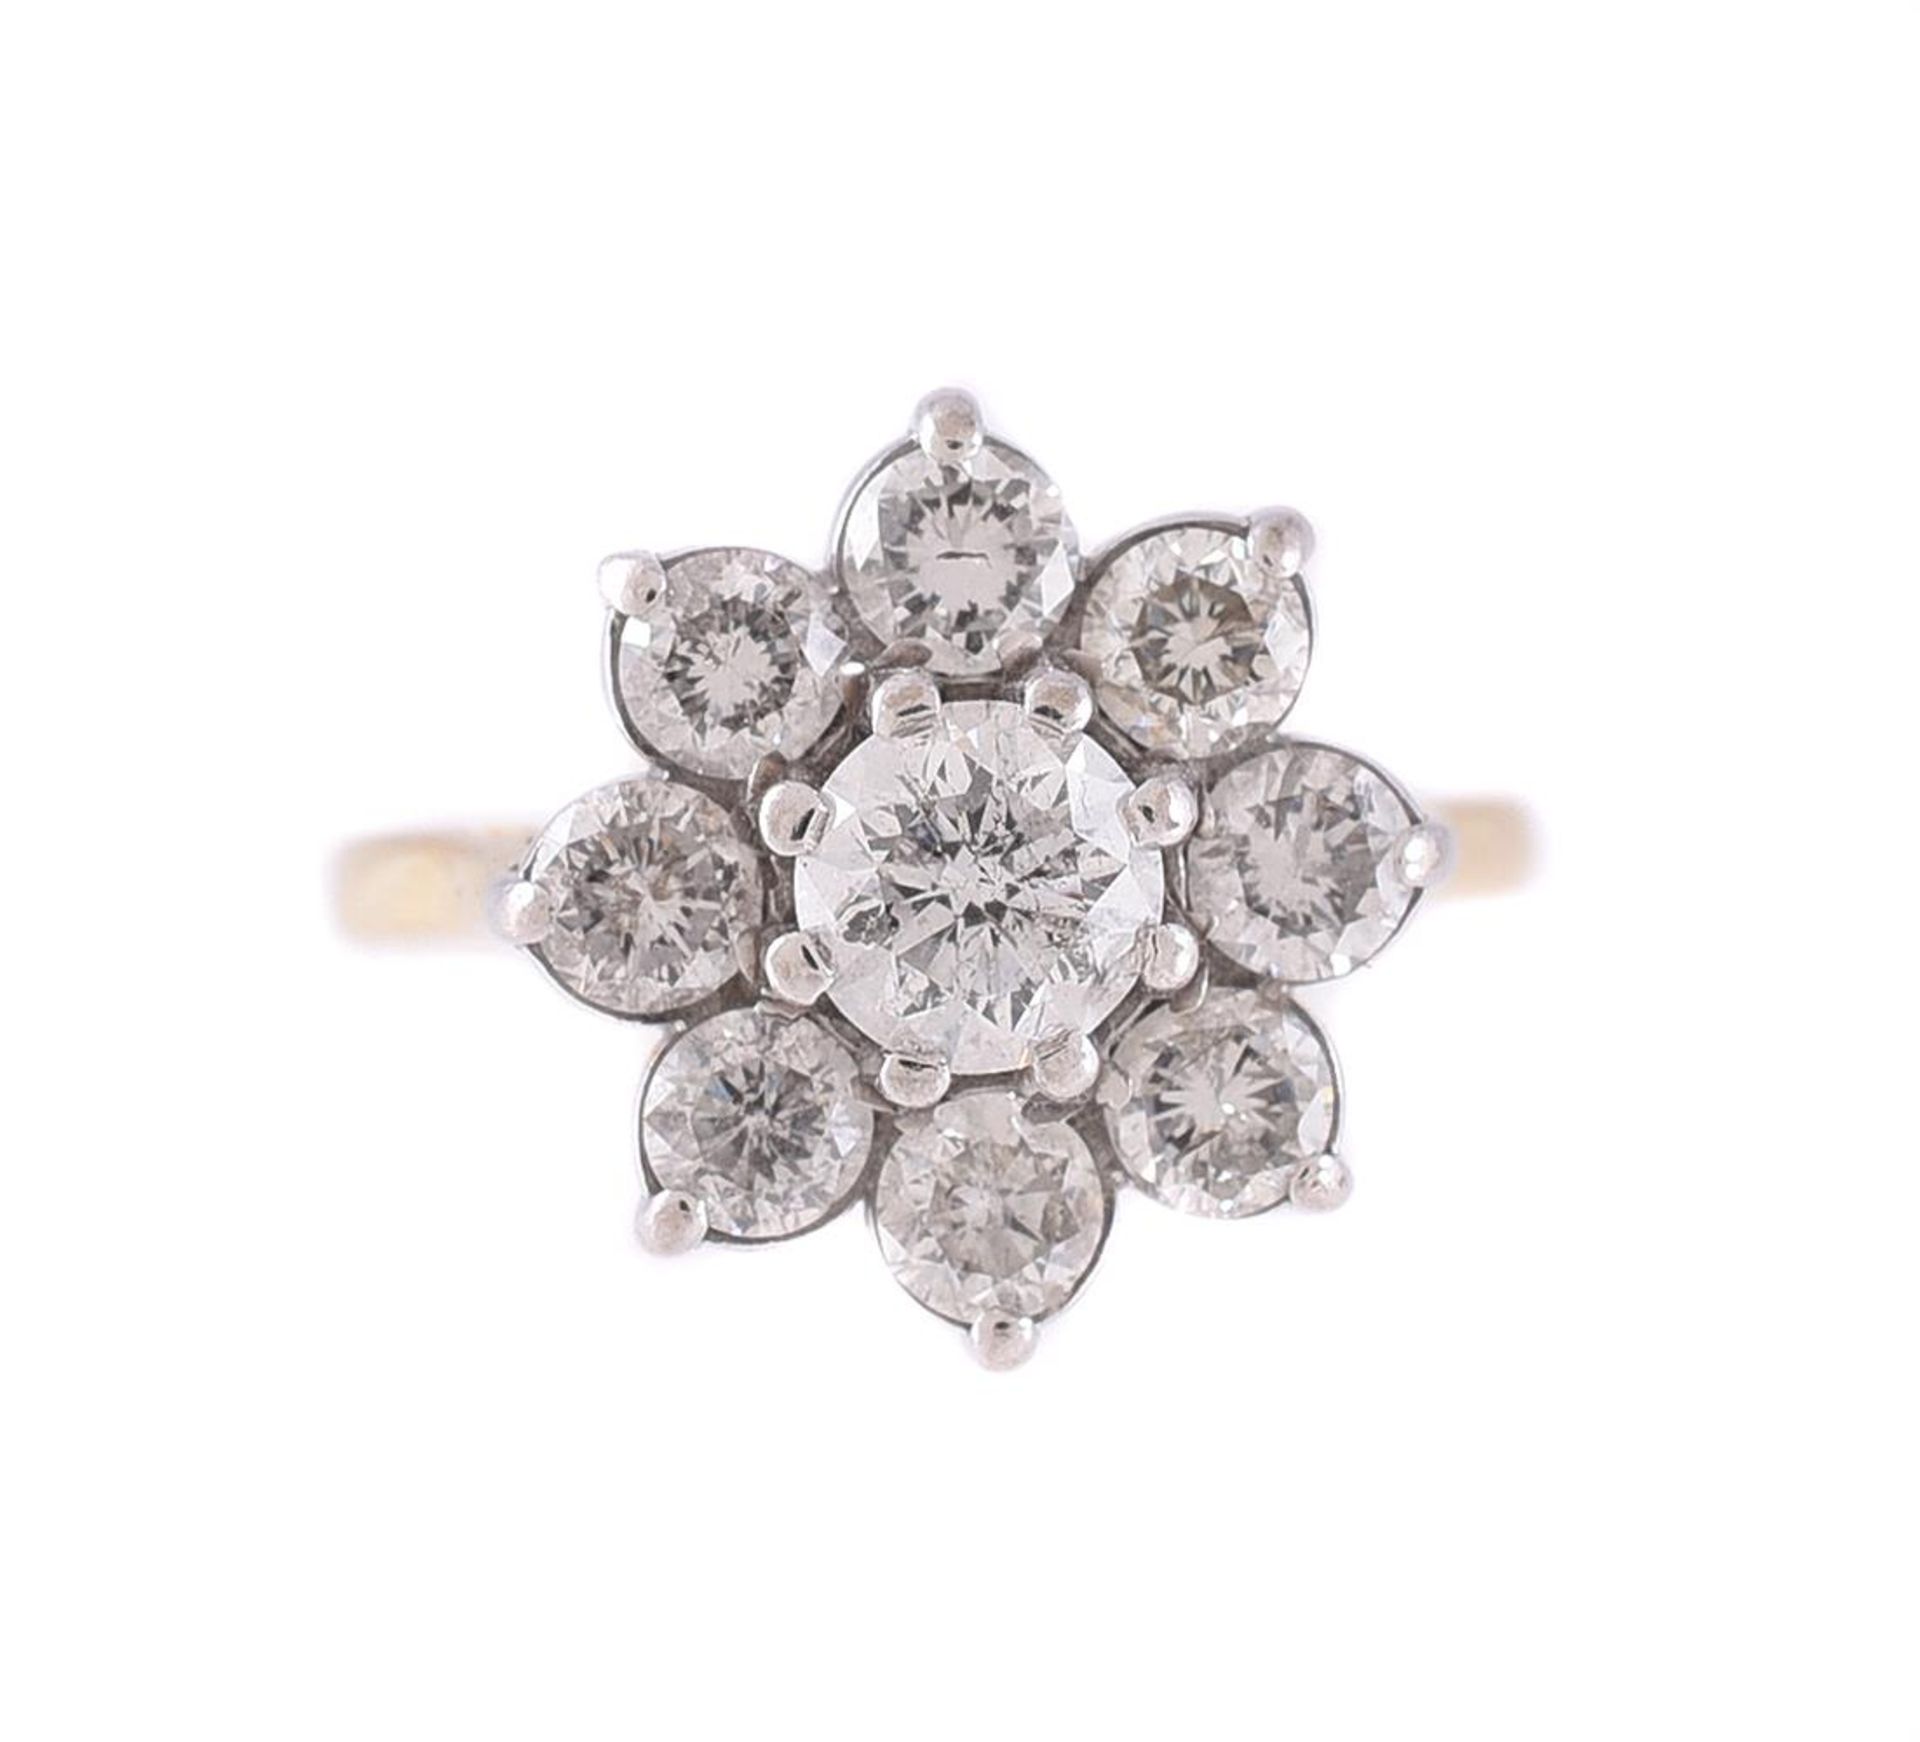 A DIAMOND CLUSTER RING